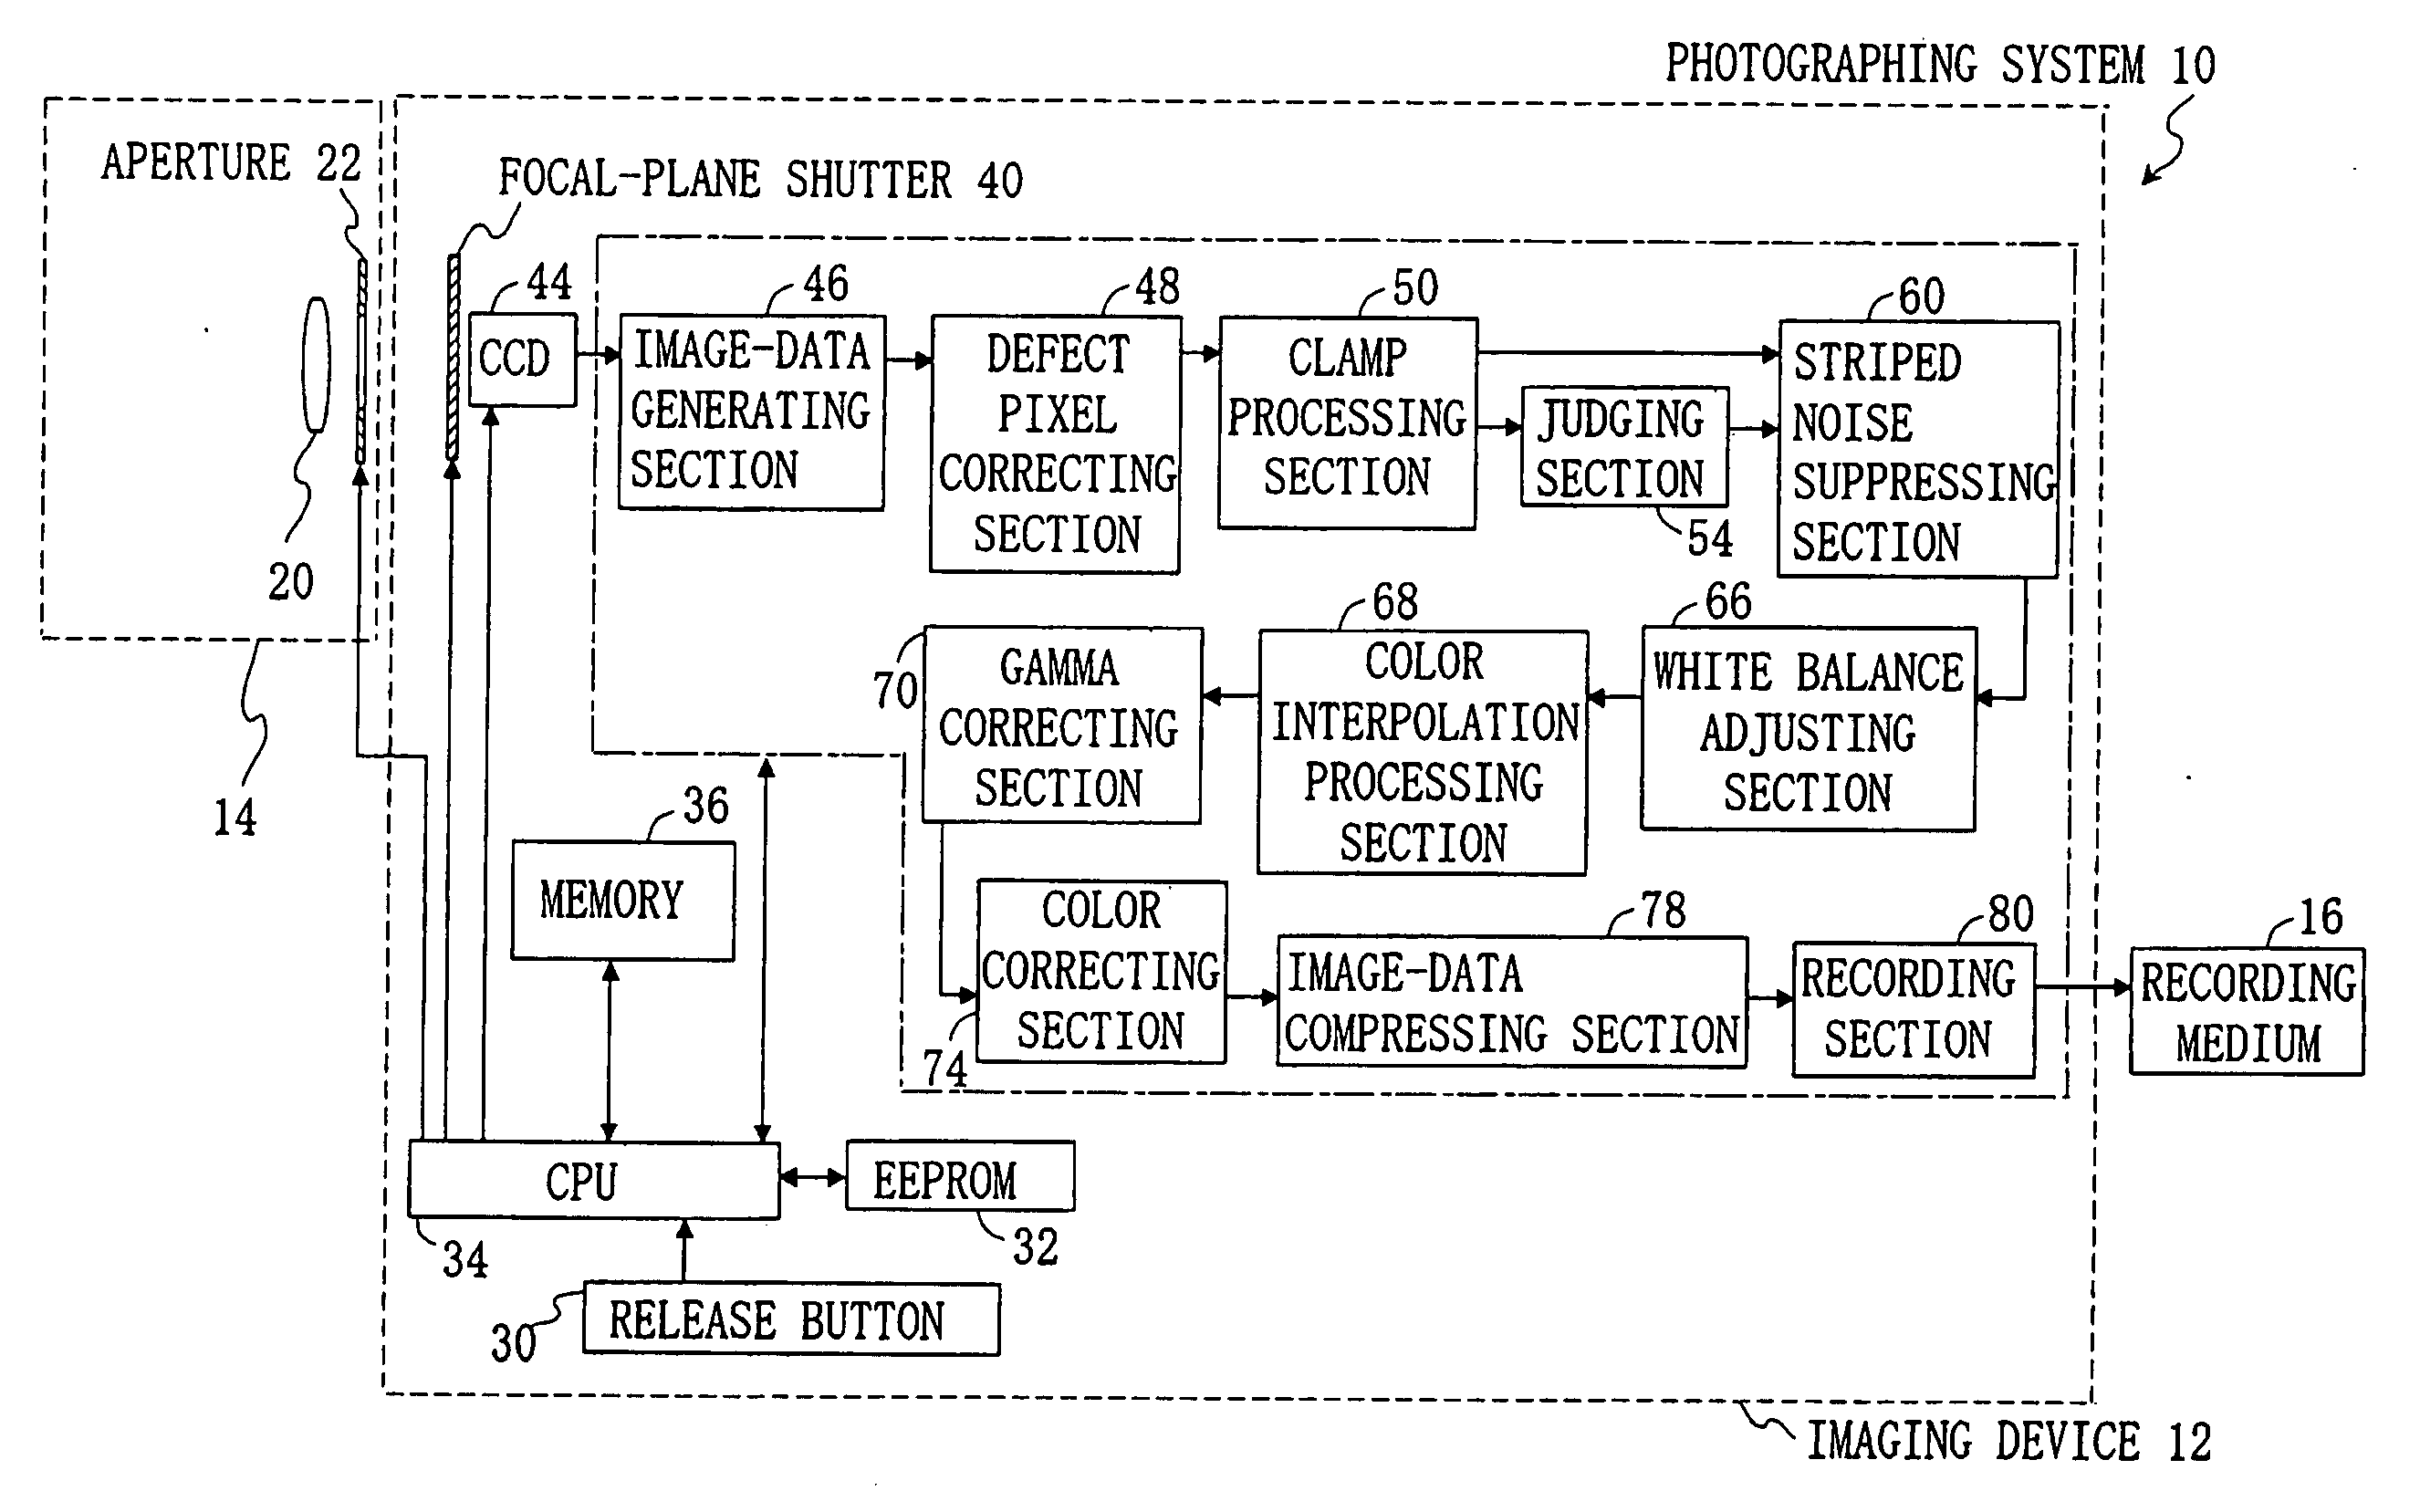 Imaging device performing color image data processing